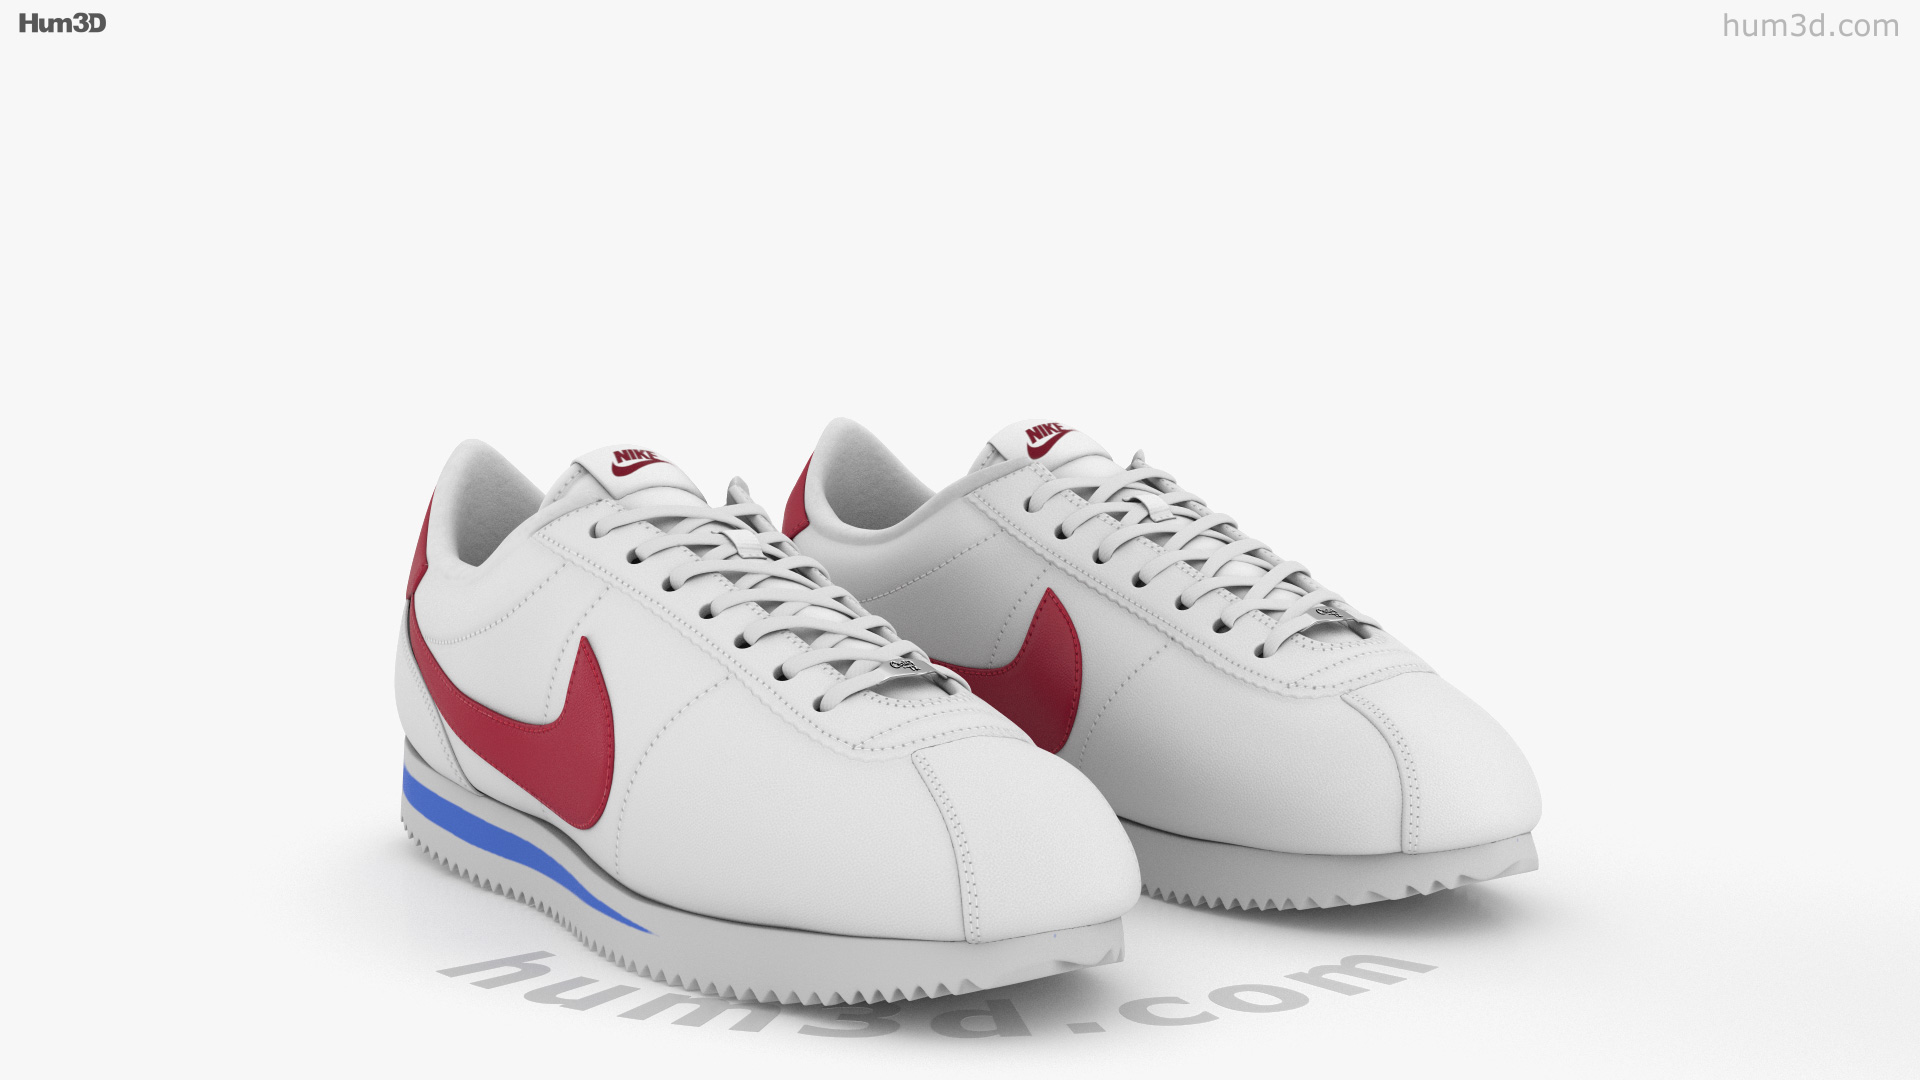 360 view of Nike Cortez 3D model 